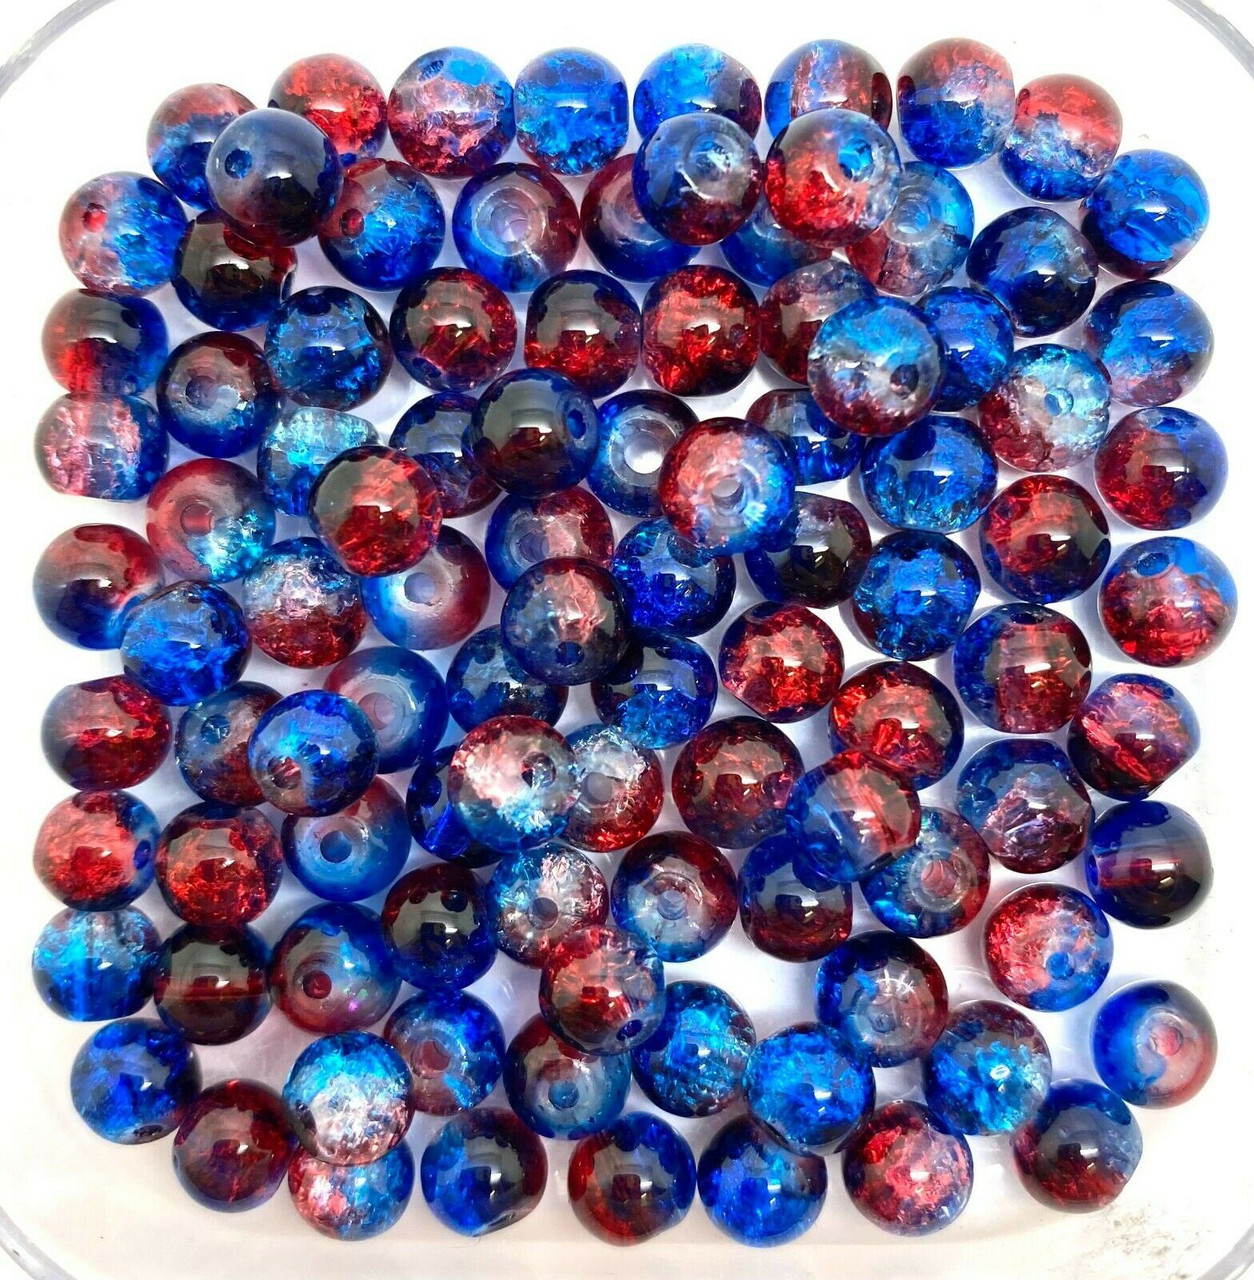 8mm Crackle Glass Beads - Red & Blue, 50 beads